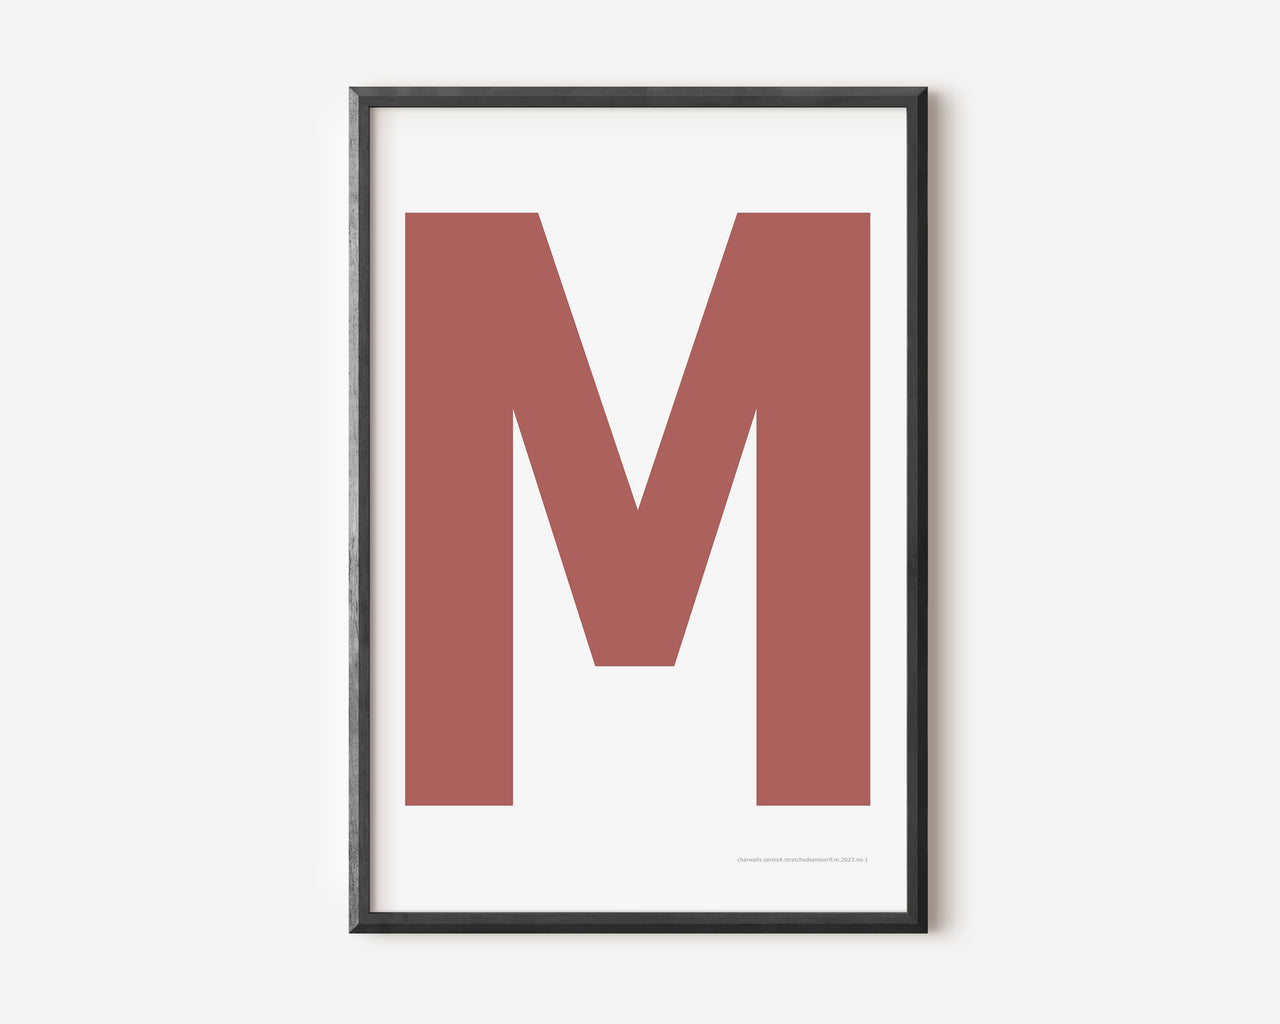 Modern art print with an uppercase Nantucket red letter M on a white background.